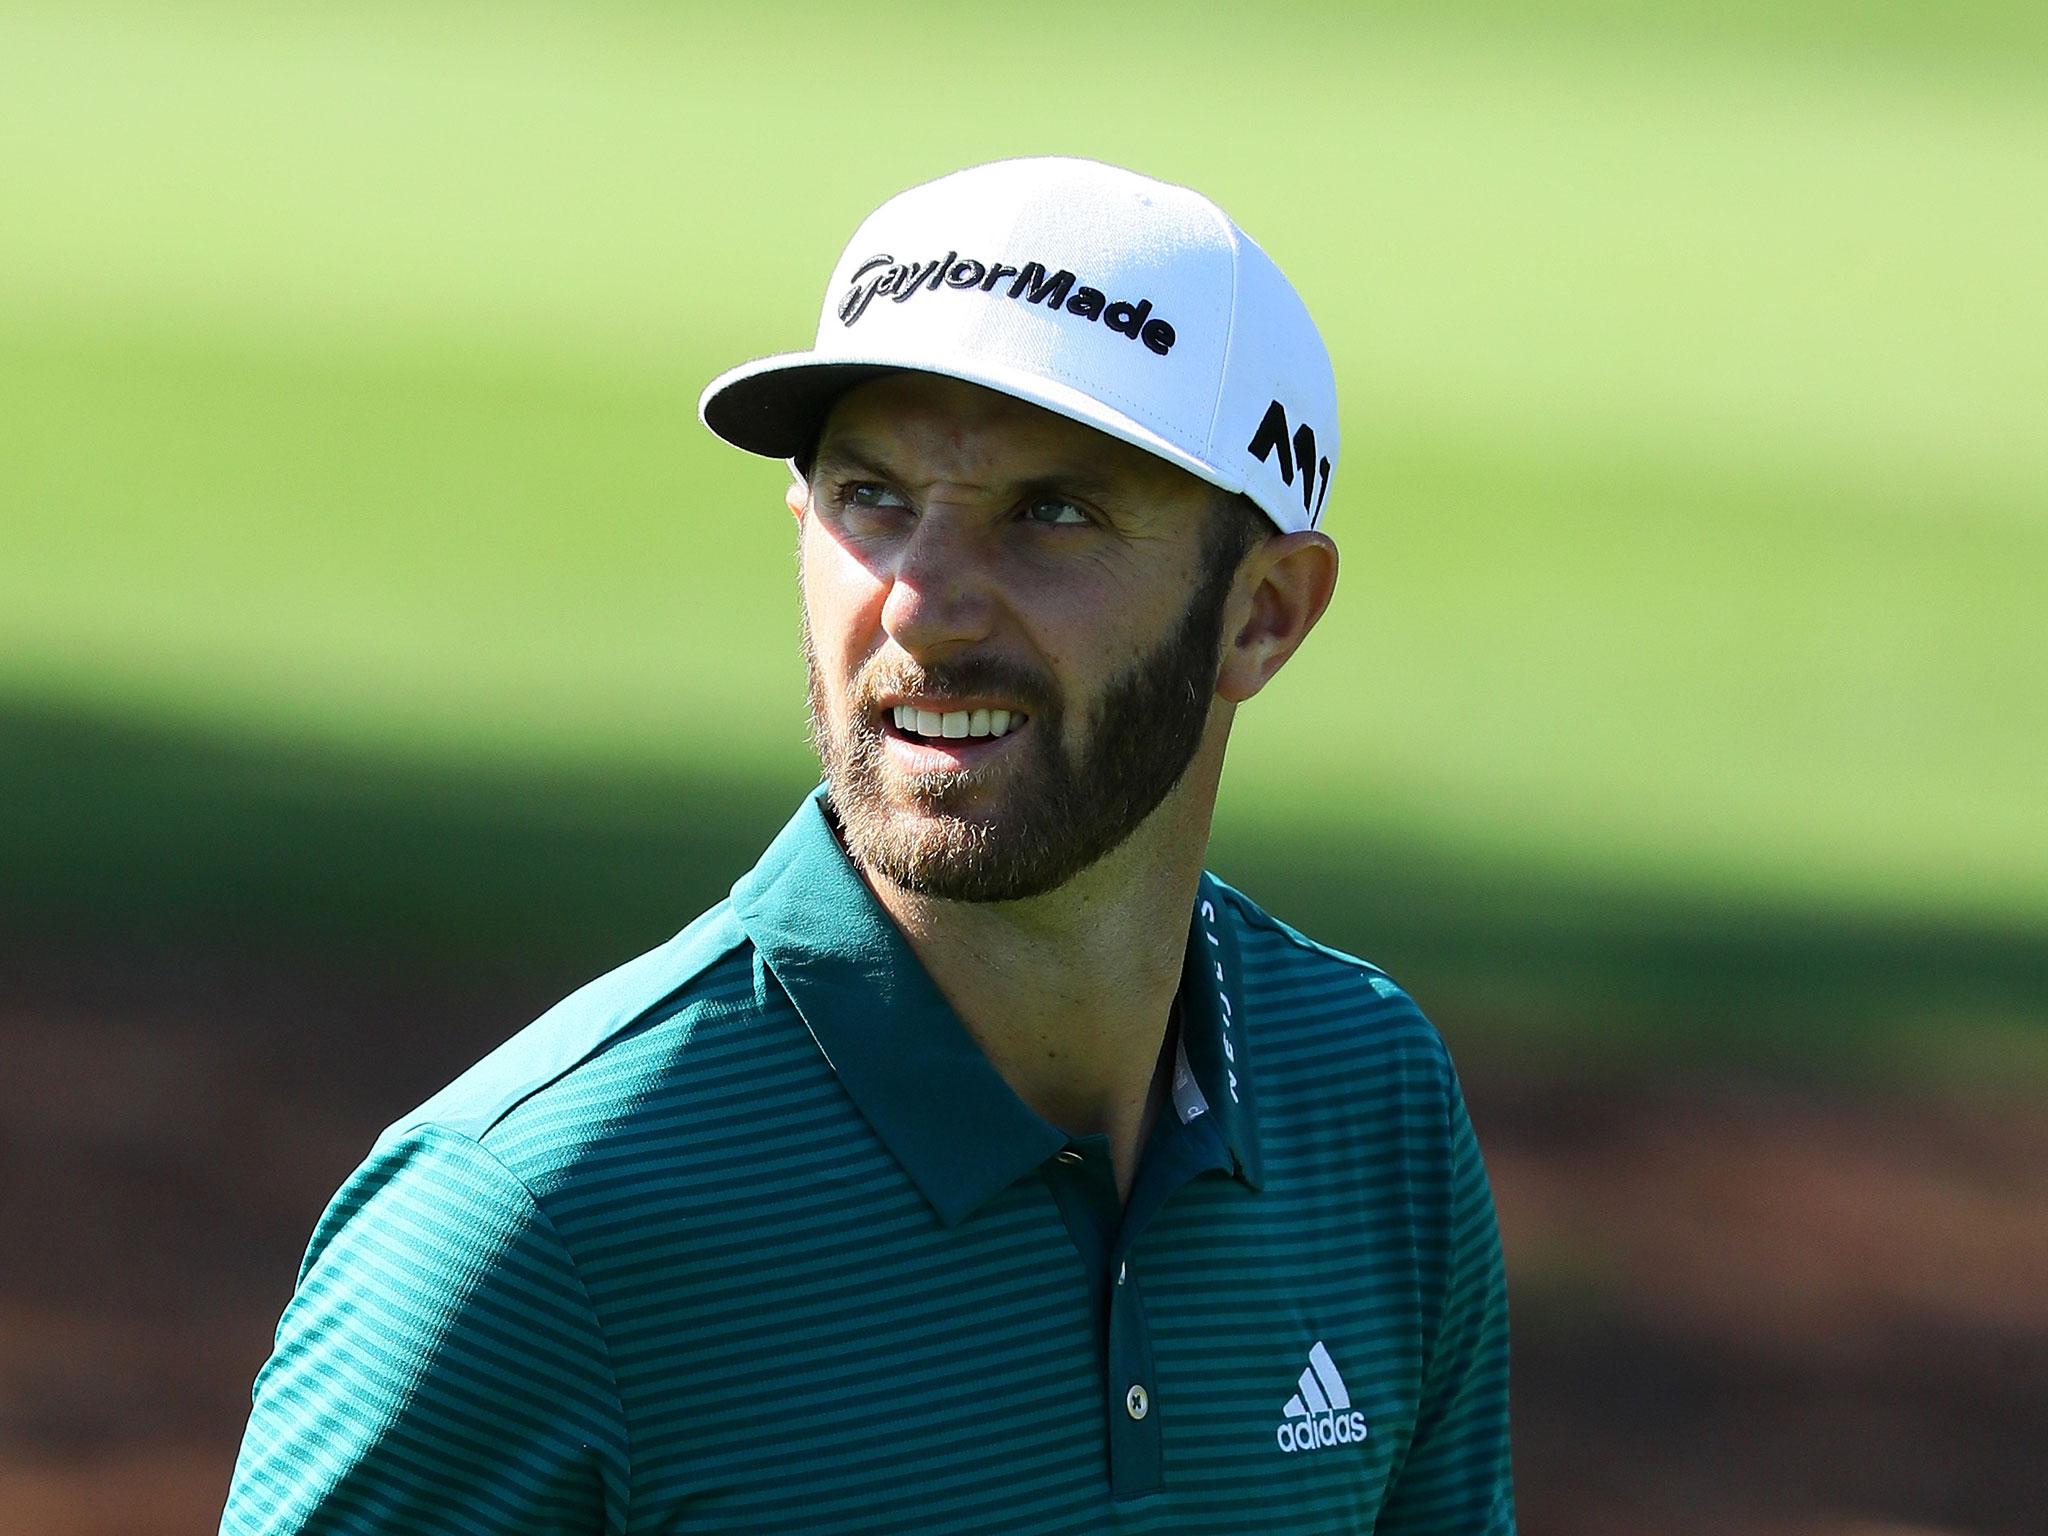 Dustin Johnson could now miss the Masters after a fall at his rental home